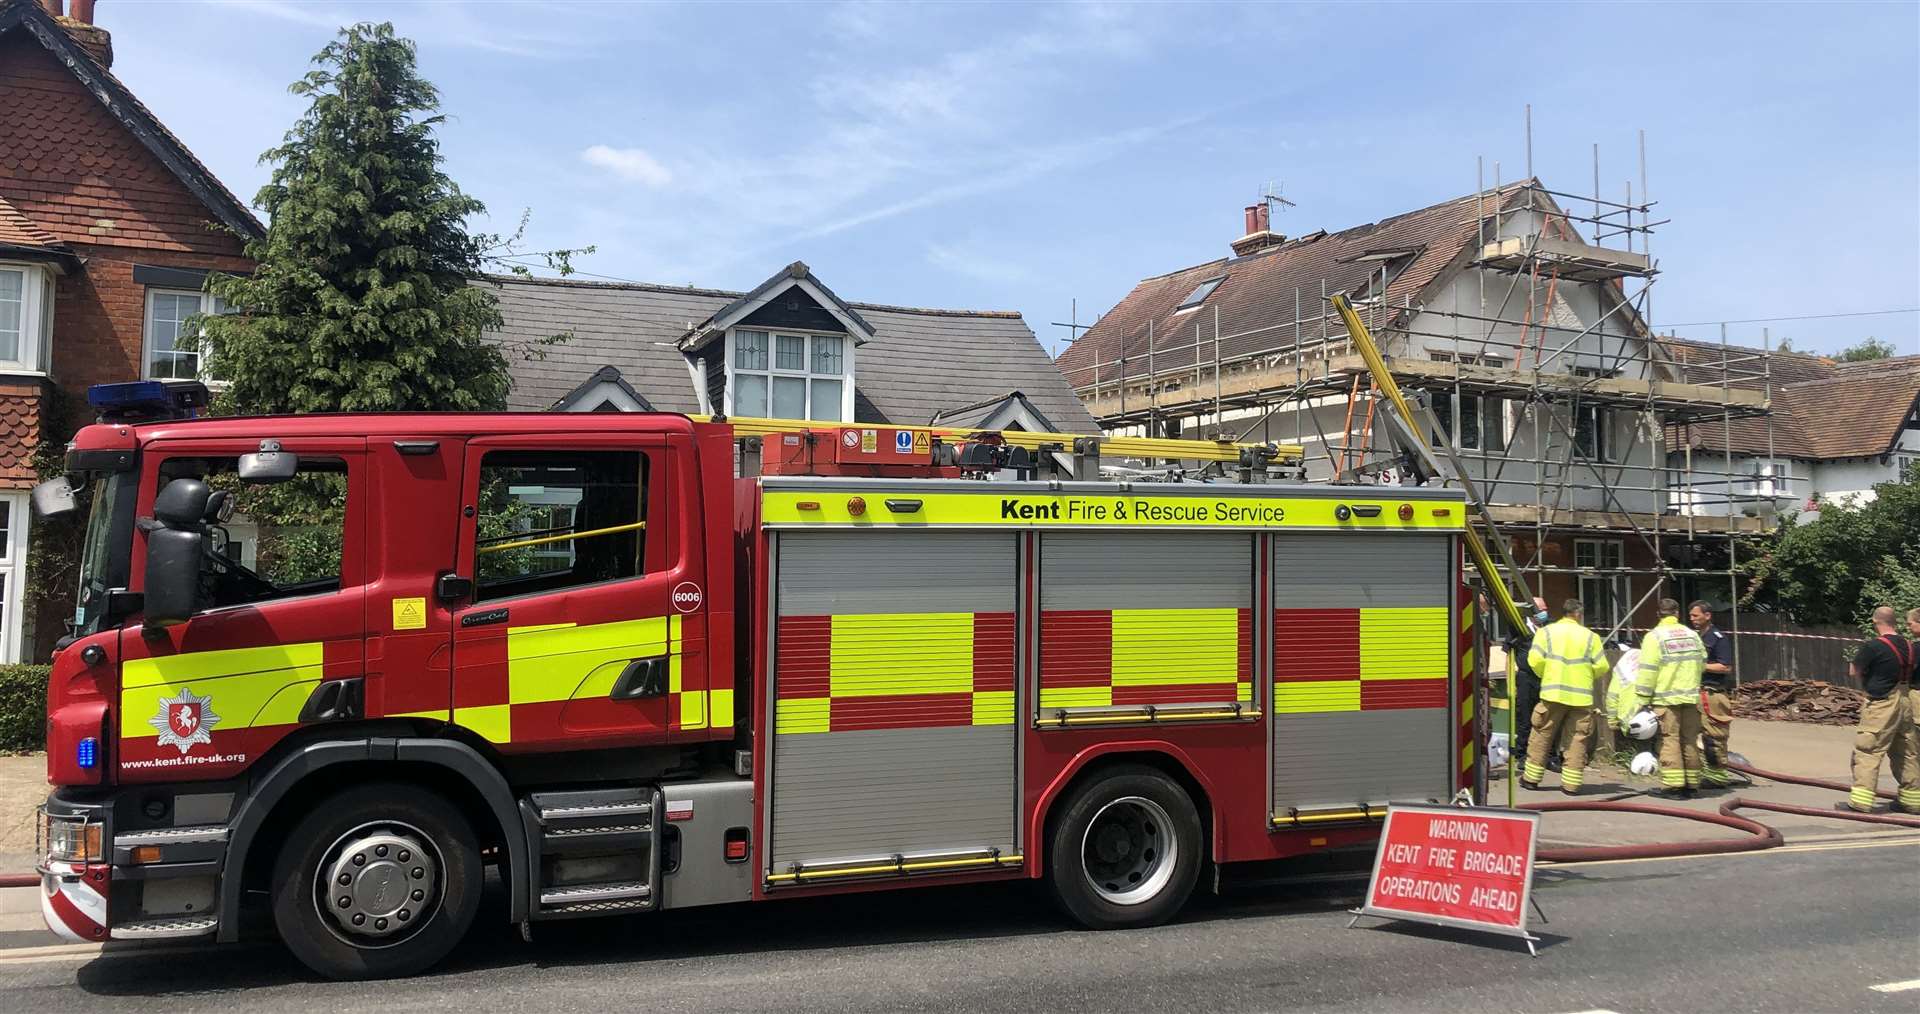 Six fire engines were called to a roof blaze at a property in Loose Road, Maidstone